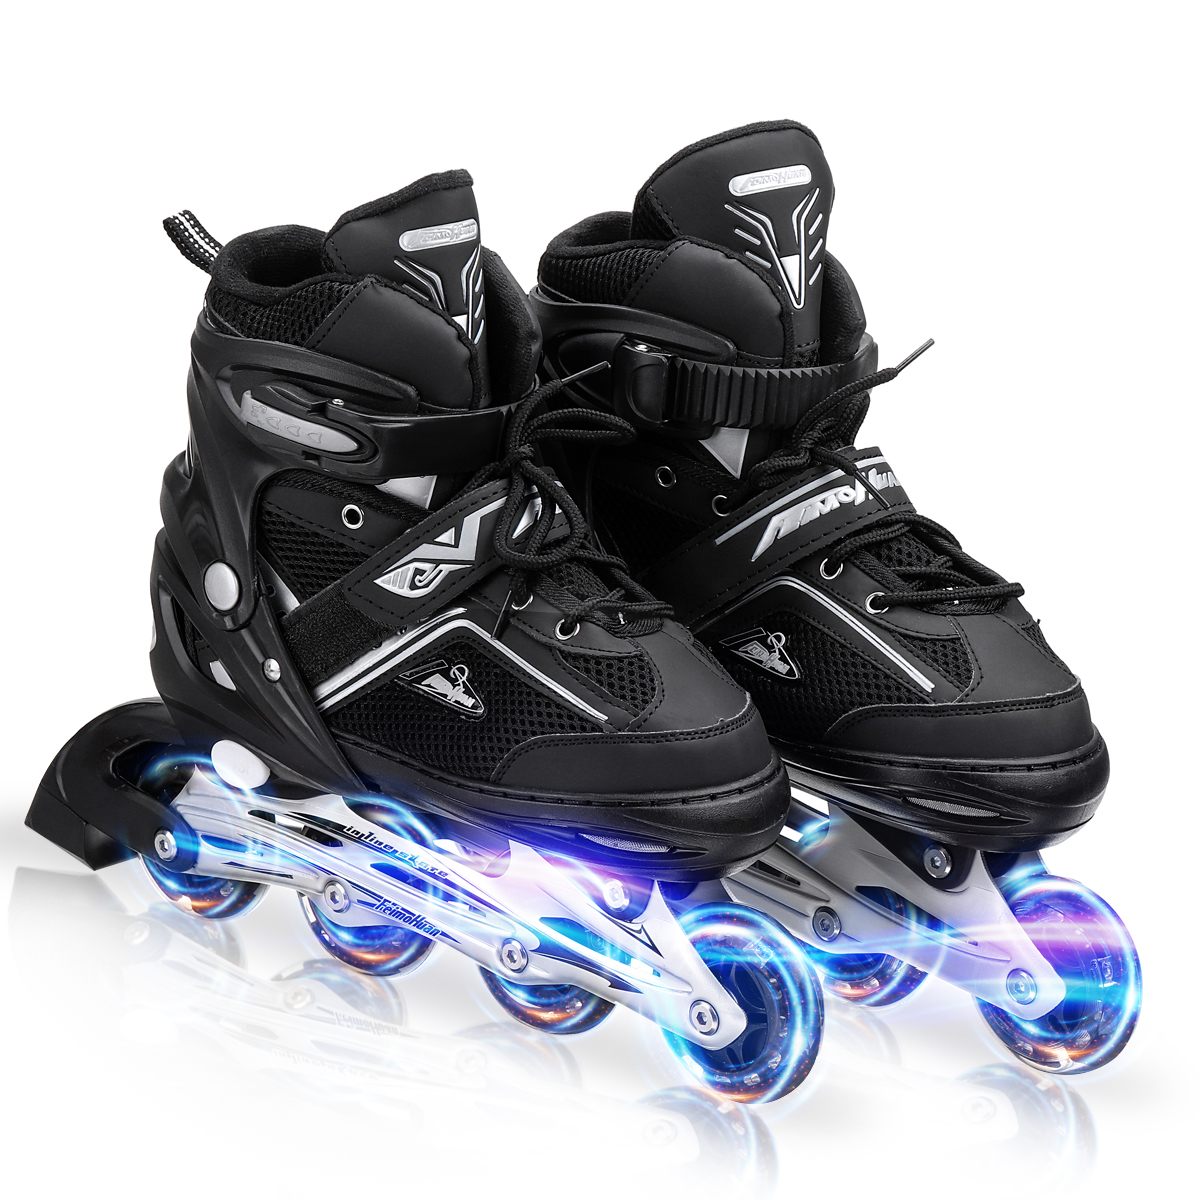 4-Size-Adjustable-SafeDurable-Inline-Skates-for-Kids-and-Adults-Outdoor-Blades-Roller-Skates-with-Fu-1827194-13